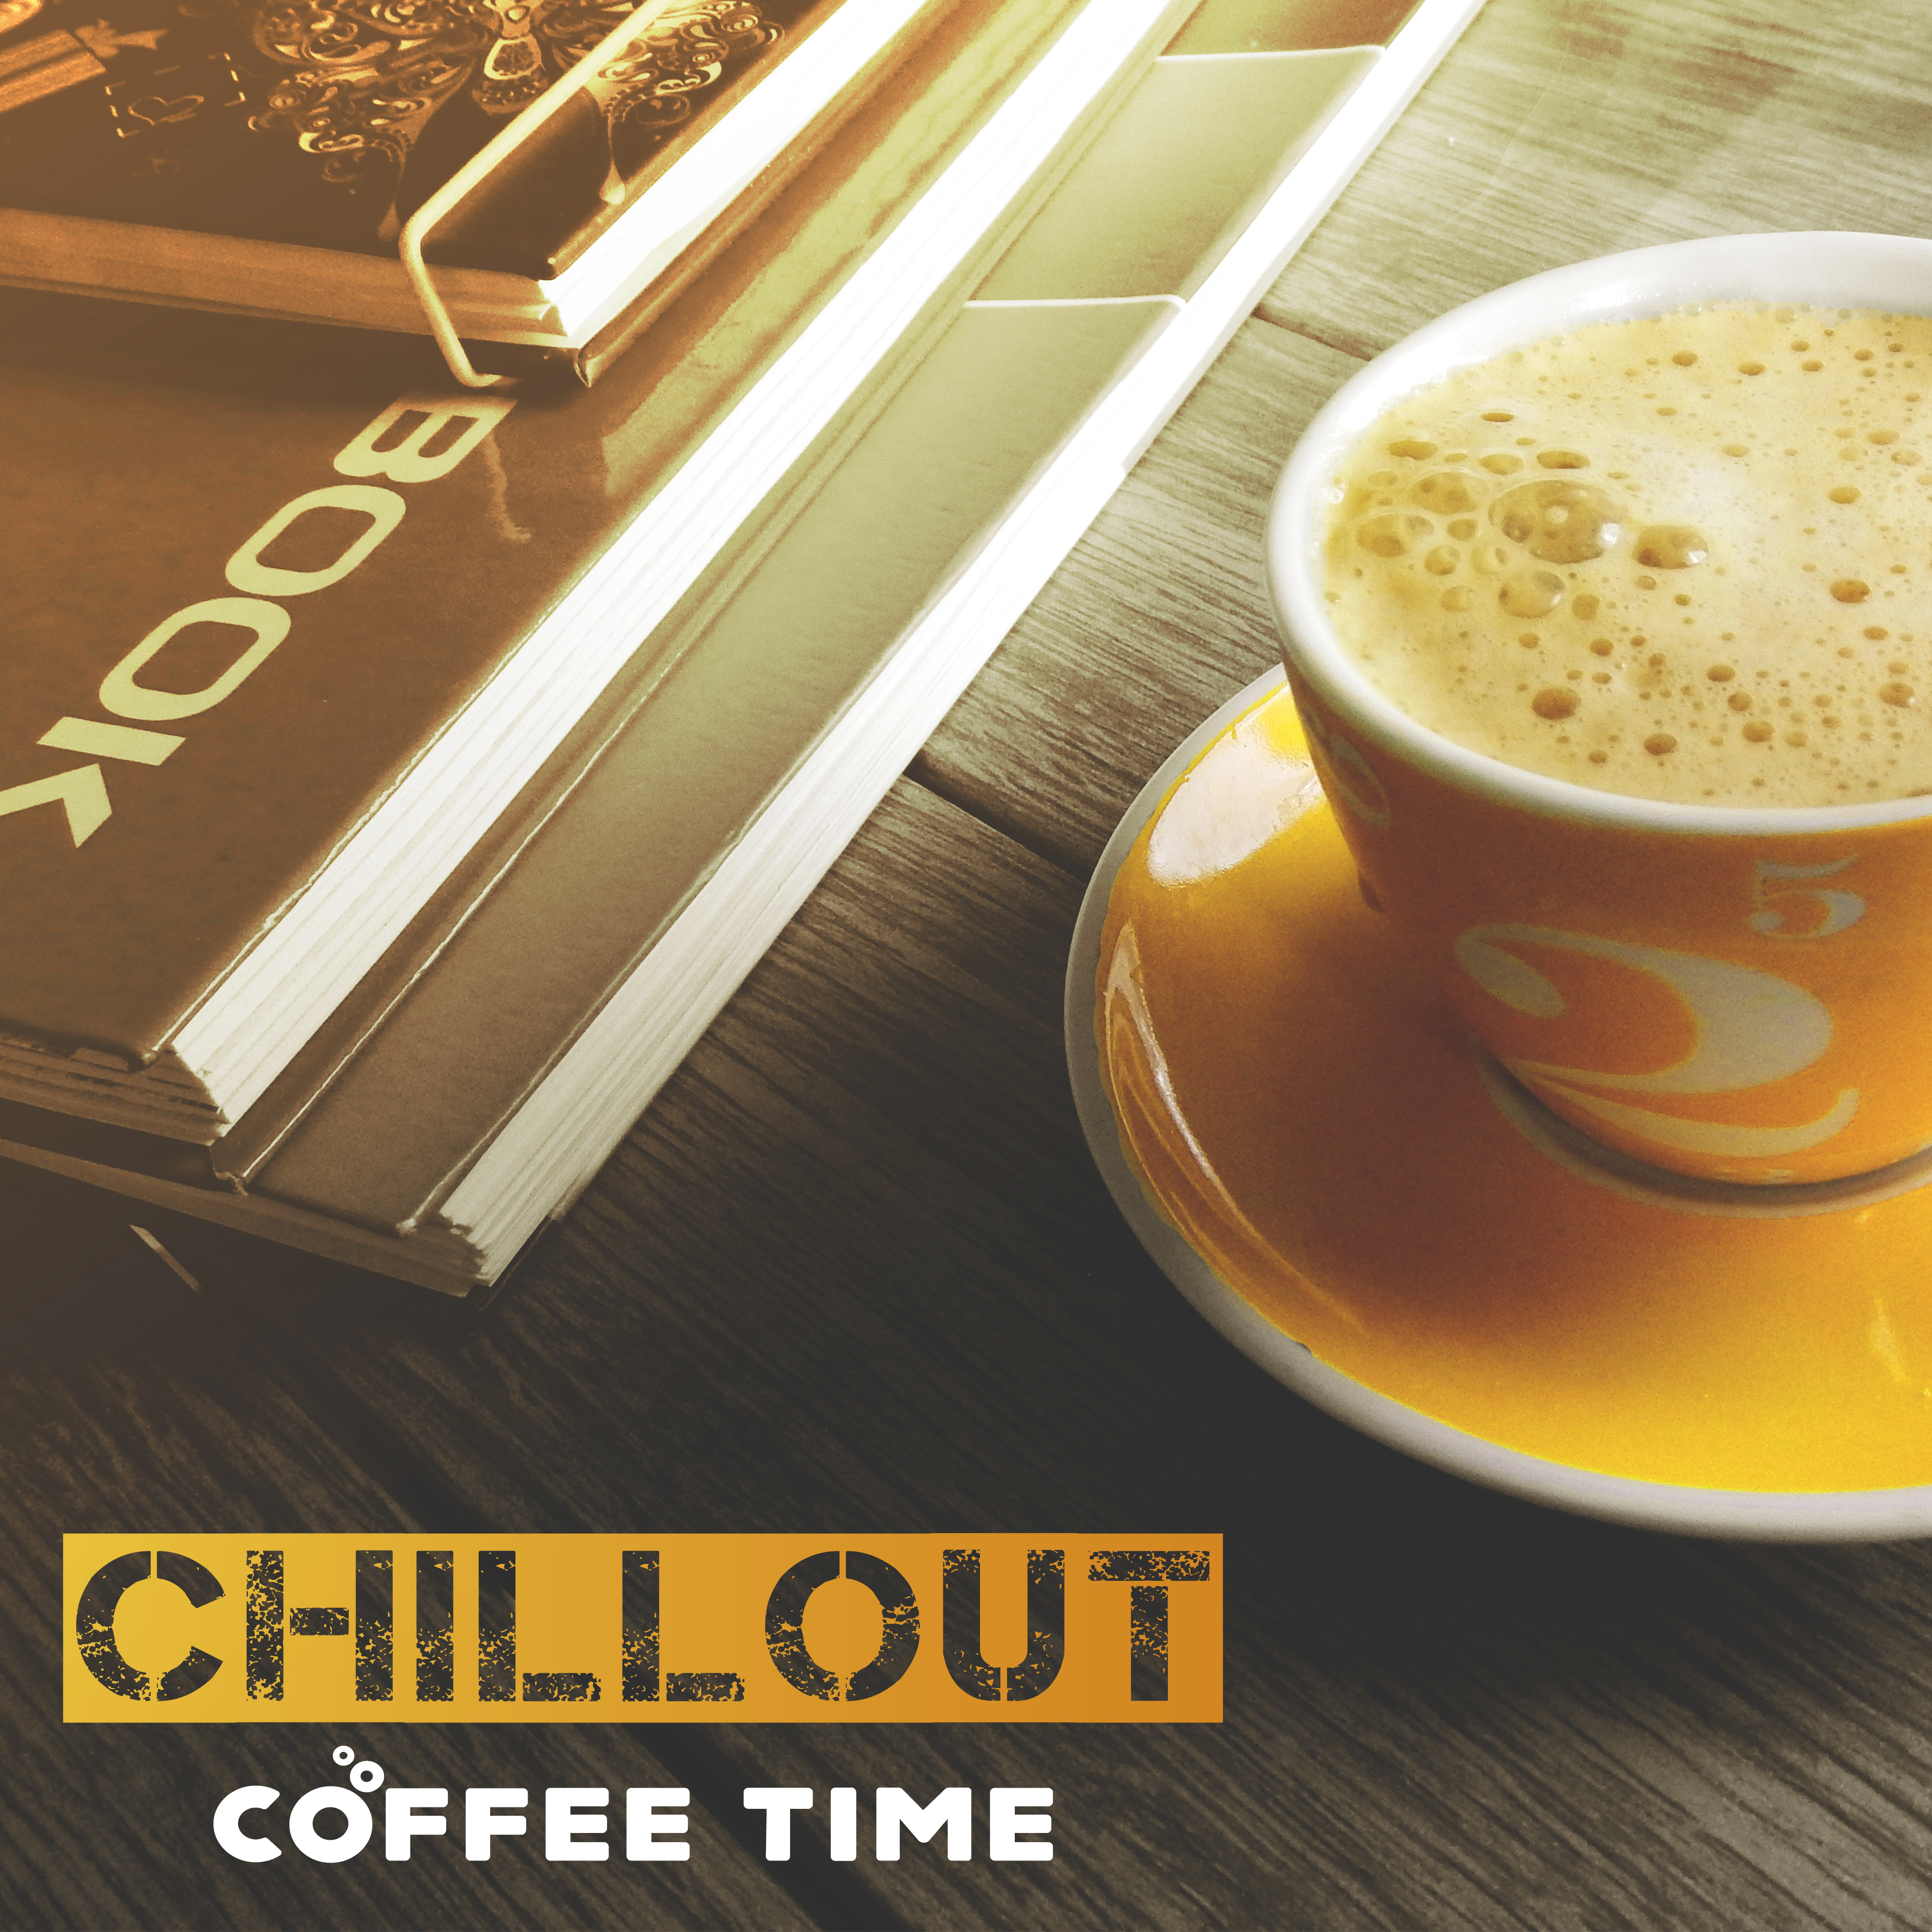 Chillout Coffee Time – Summer Chillout, Cafe Music, Lounge, Relaxation, Chill Out Electronic Vibes